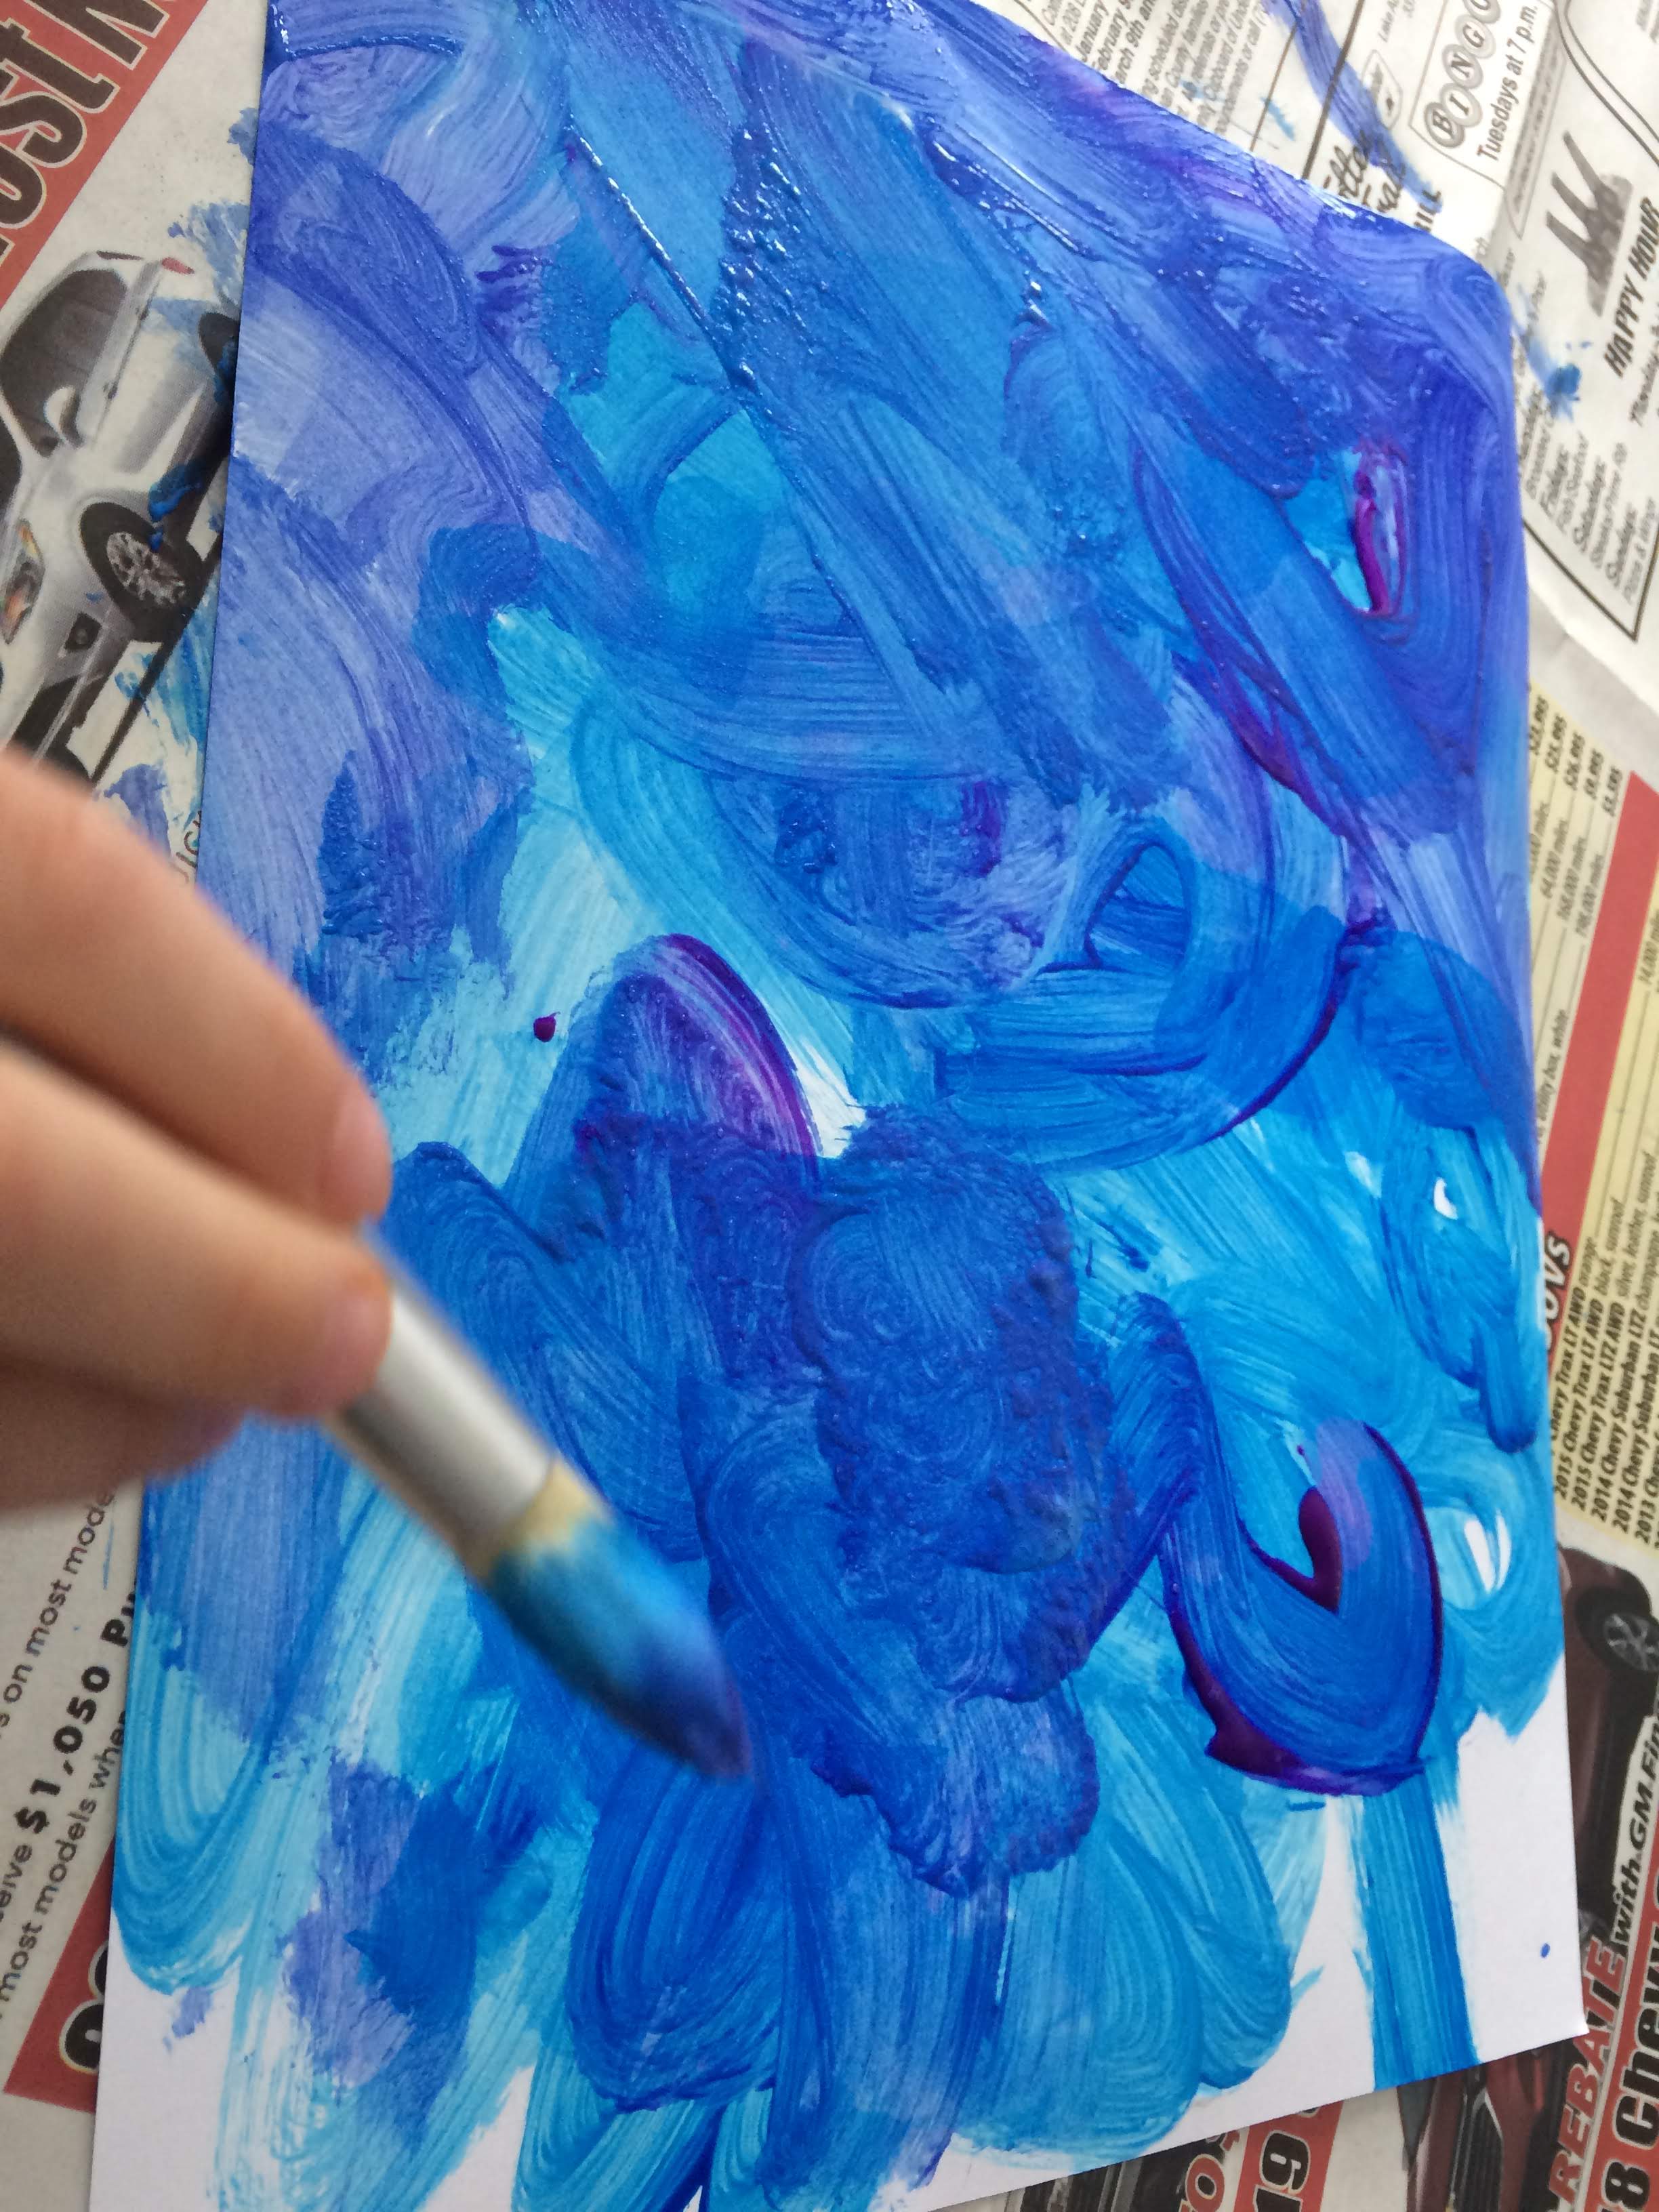 Shimmering, Sparkly Snow Paint - Process Art for Young Children